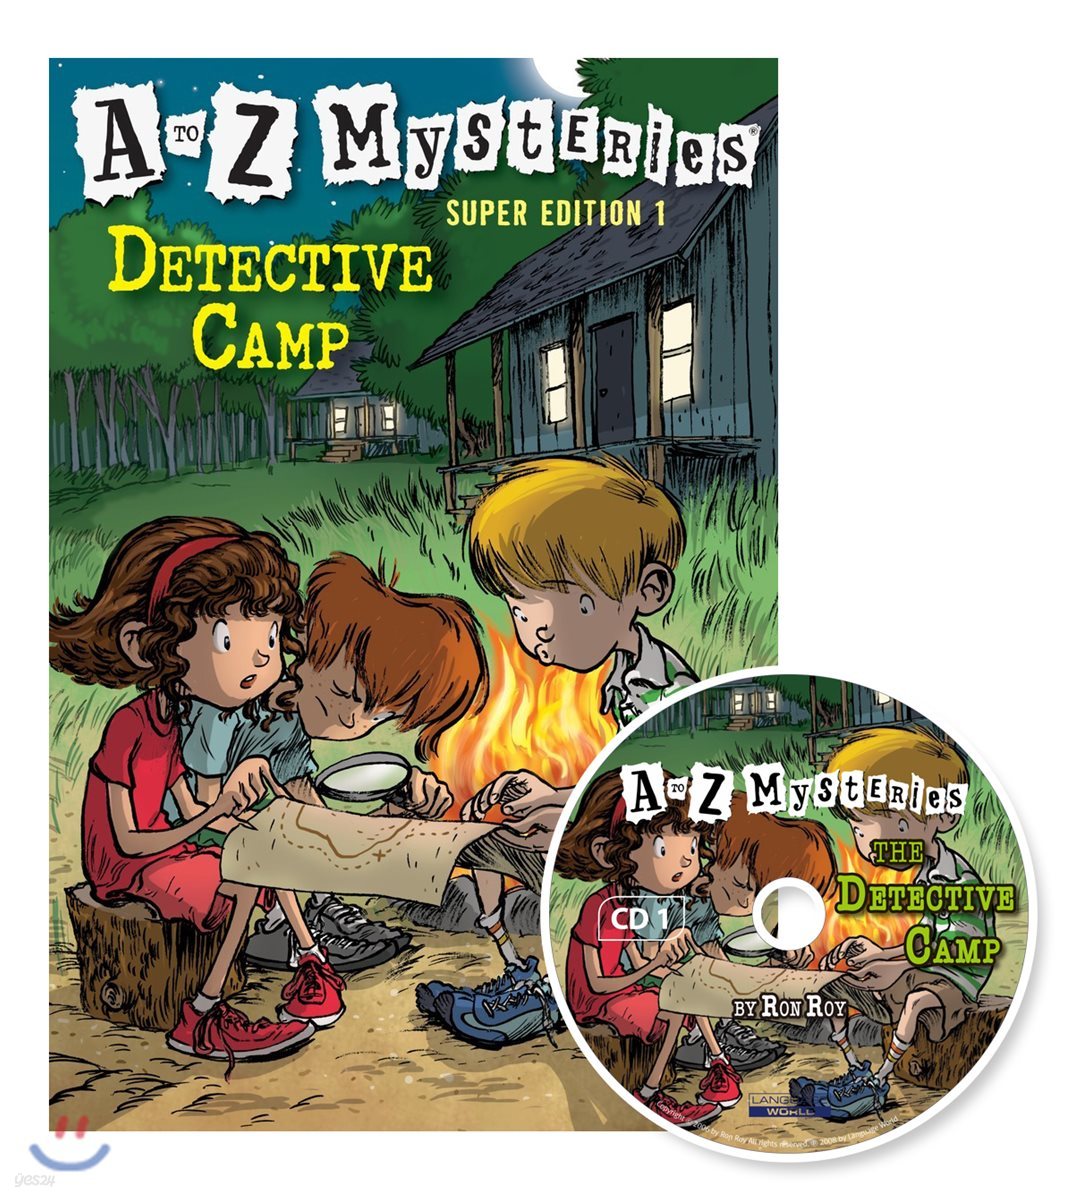 A to Z Mysteries Super Edition 1 : Detective Camp (Book+CD)